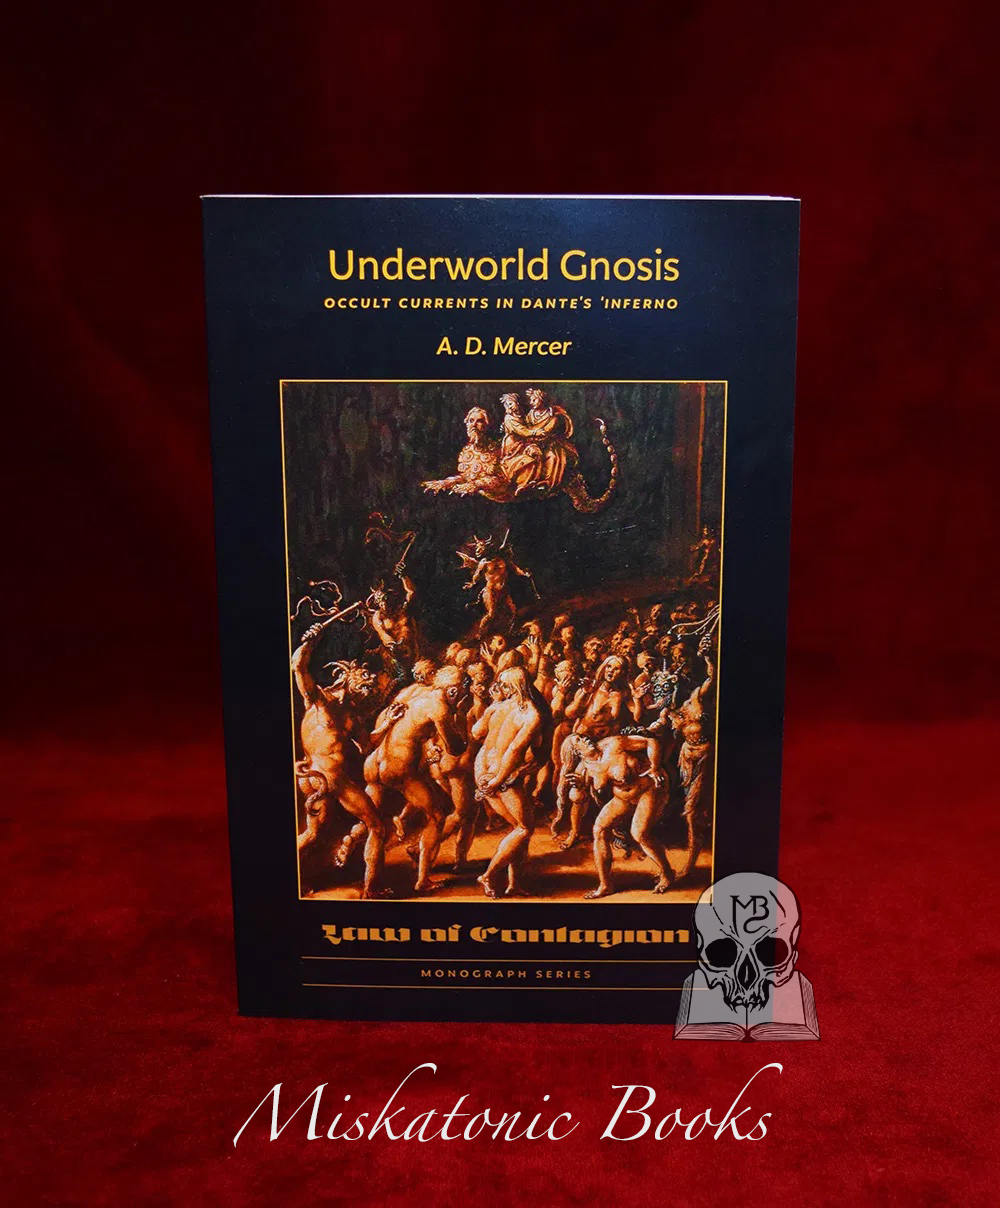 UNDERWORLD GNOSIS: Occult Currents in Dante's Inferno by A.D. Mercer - Paperback